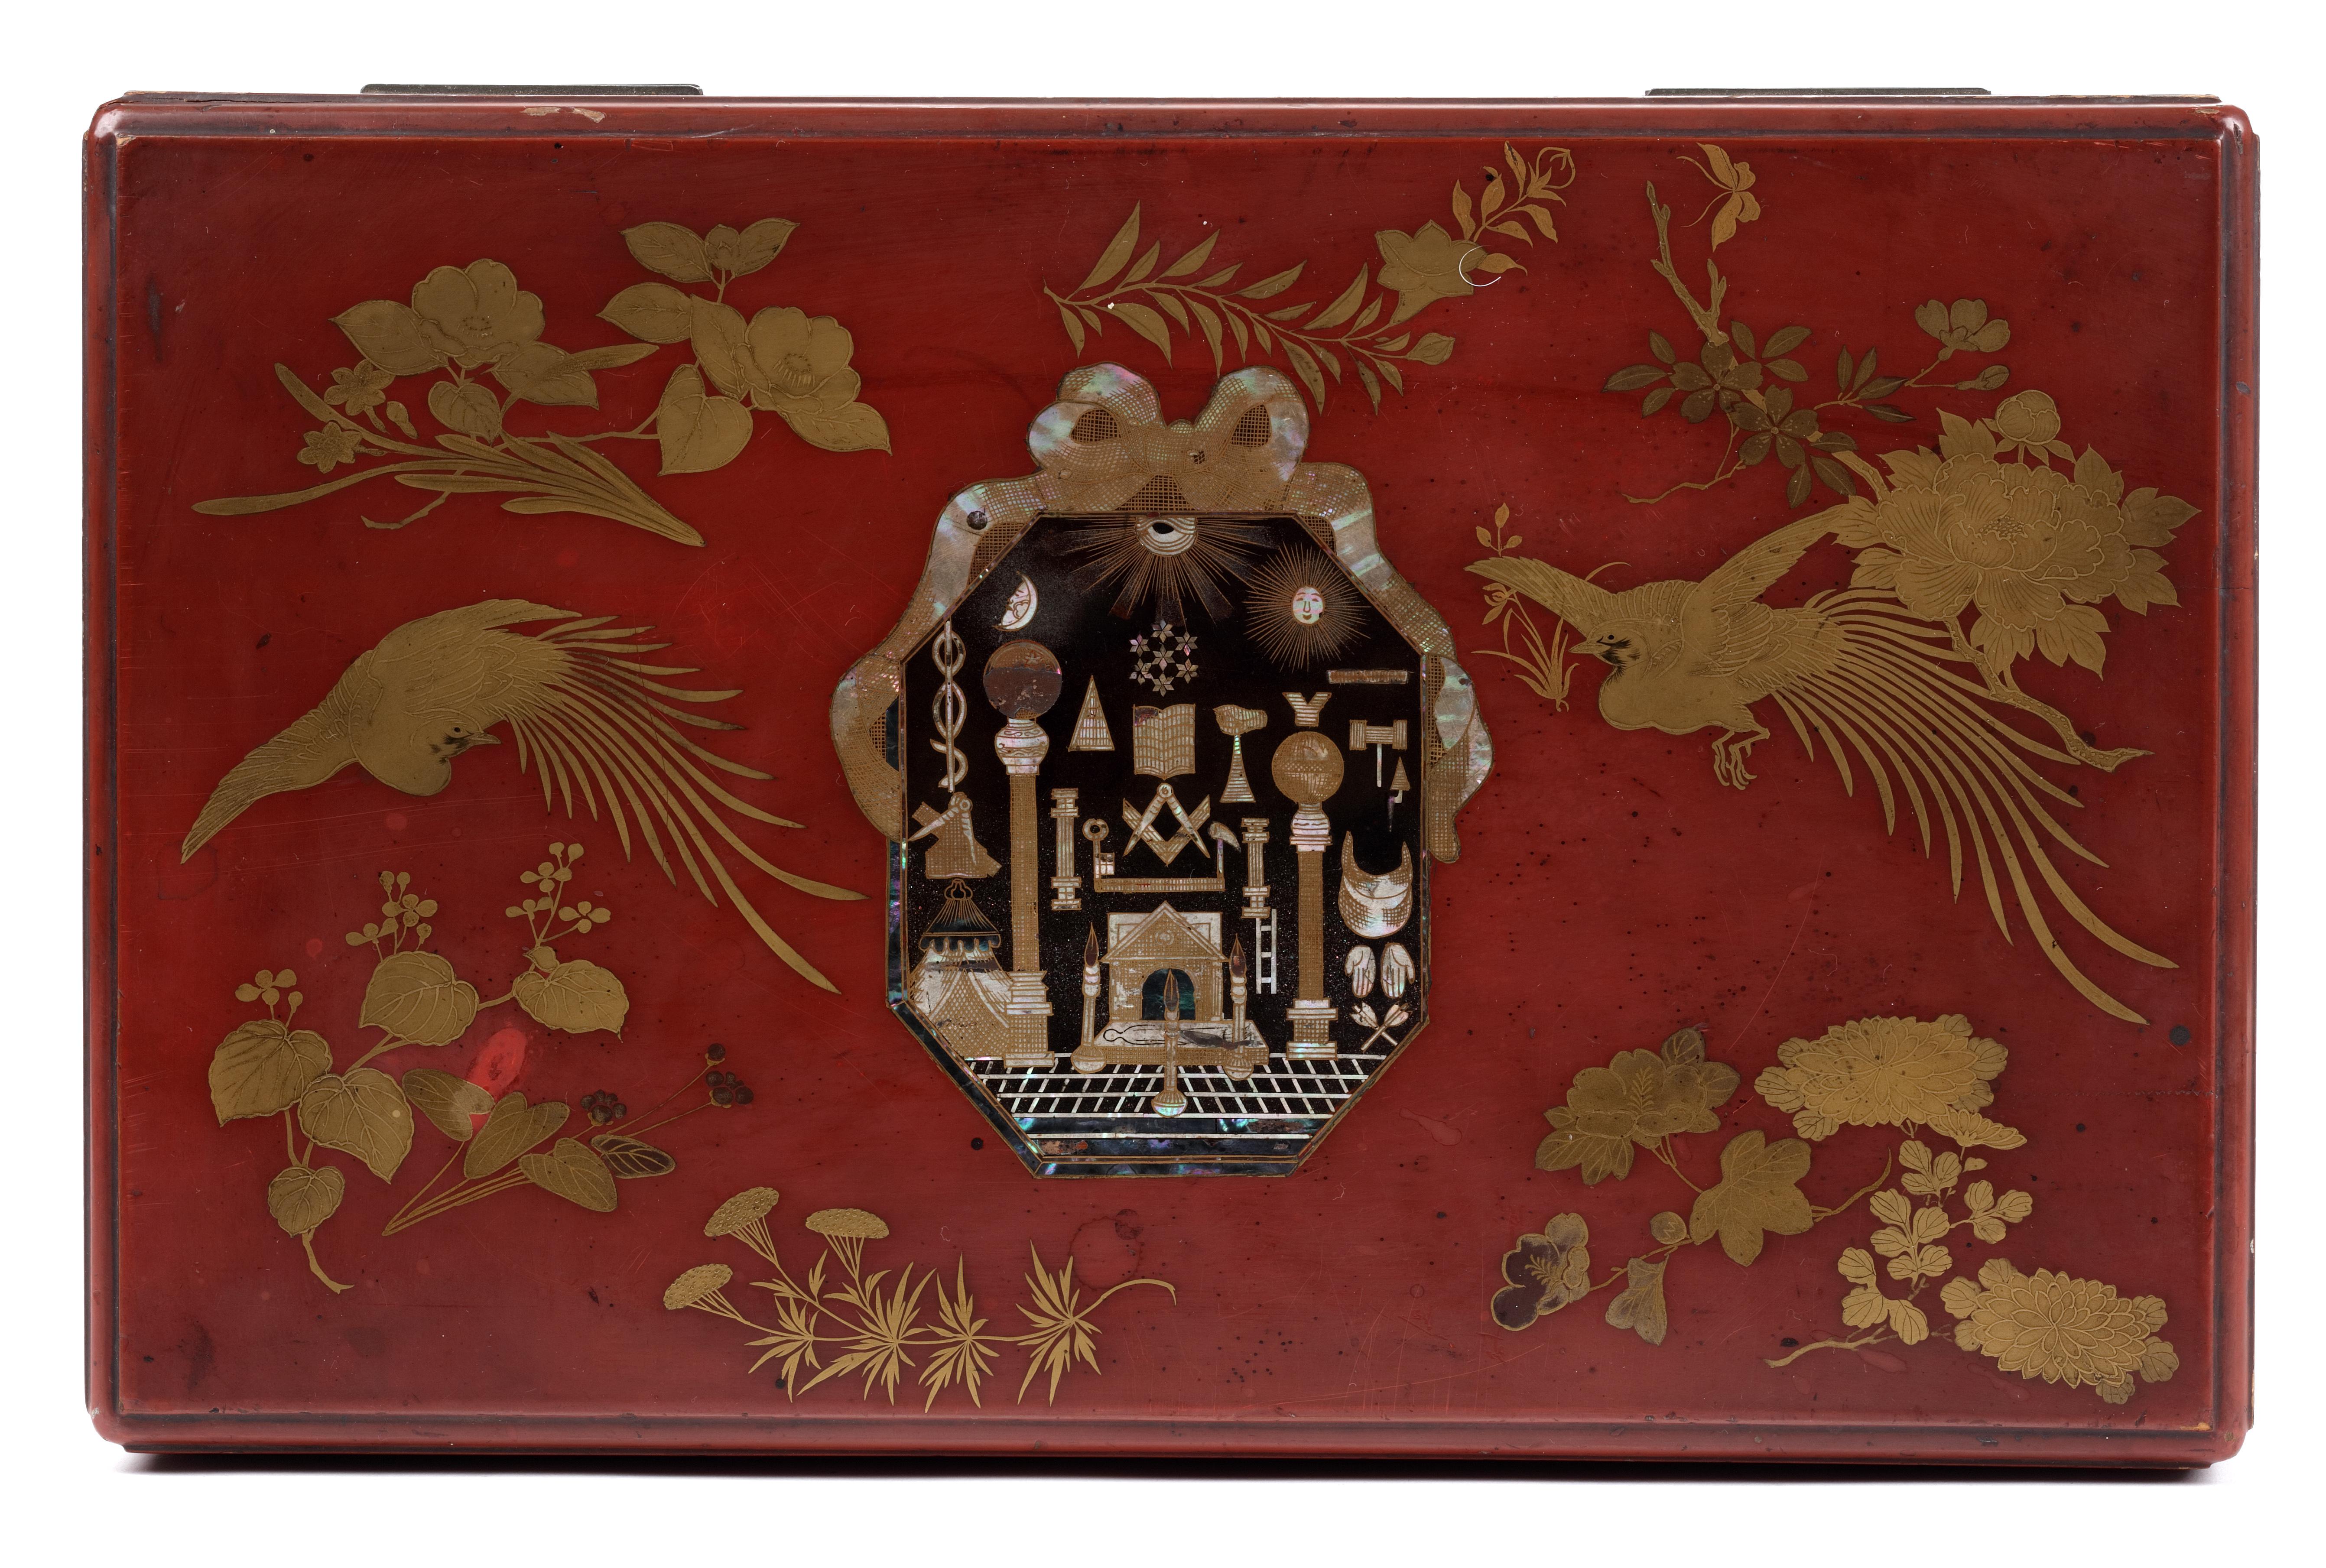 A fine Japanese export red lacquer box with Masonic symbols

Kyoto/Nagasaki, 1800-1820

Red lacquer decorated with scattered flowers and flying birds with long tails in gold, with the Masonic emblem designed in mother of pearl inlaid on a black